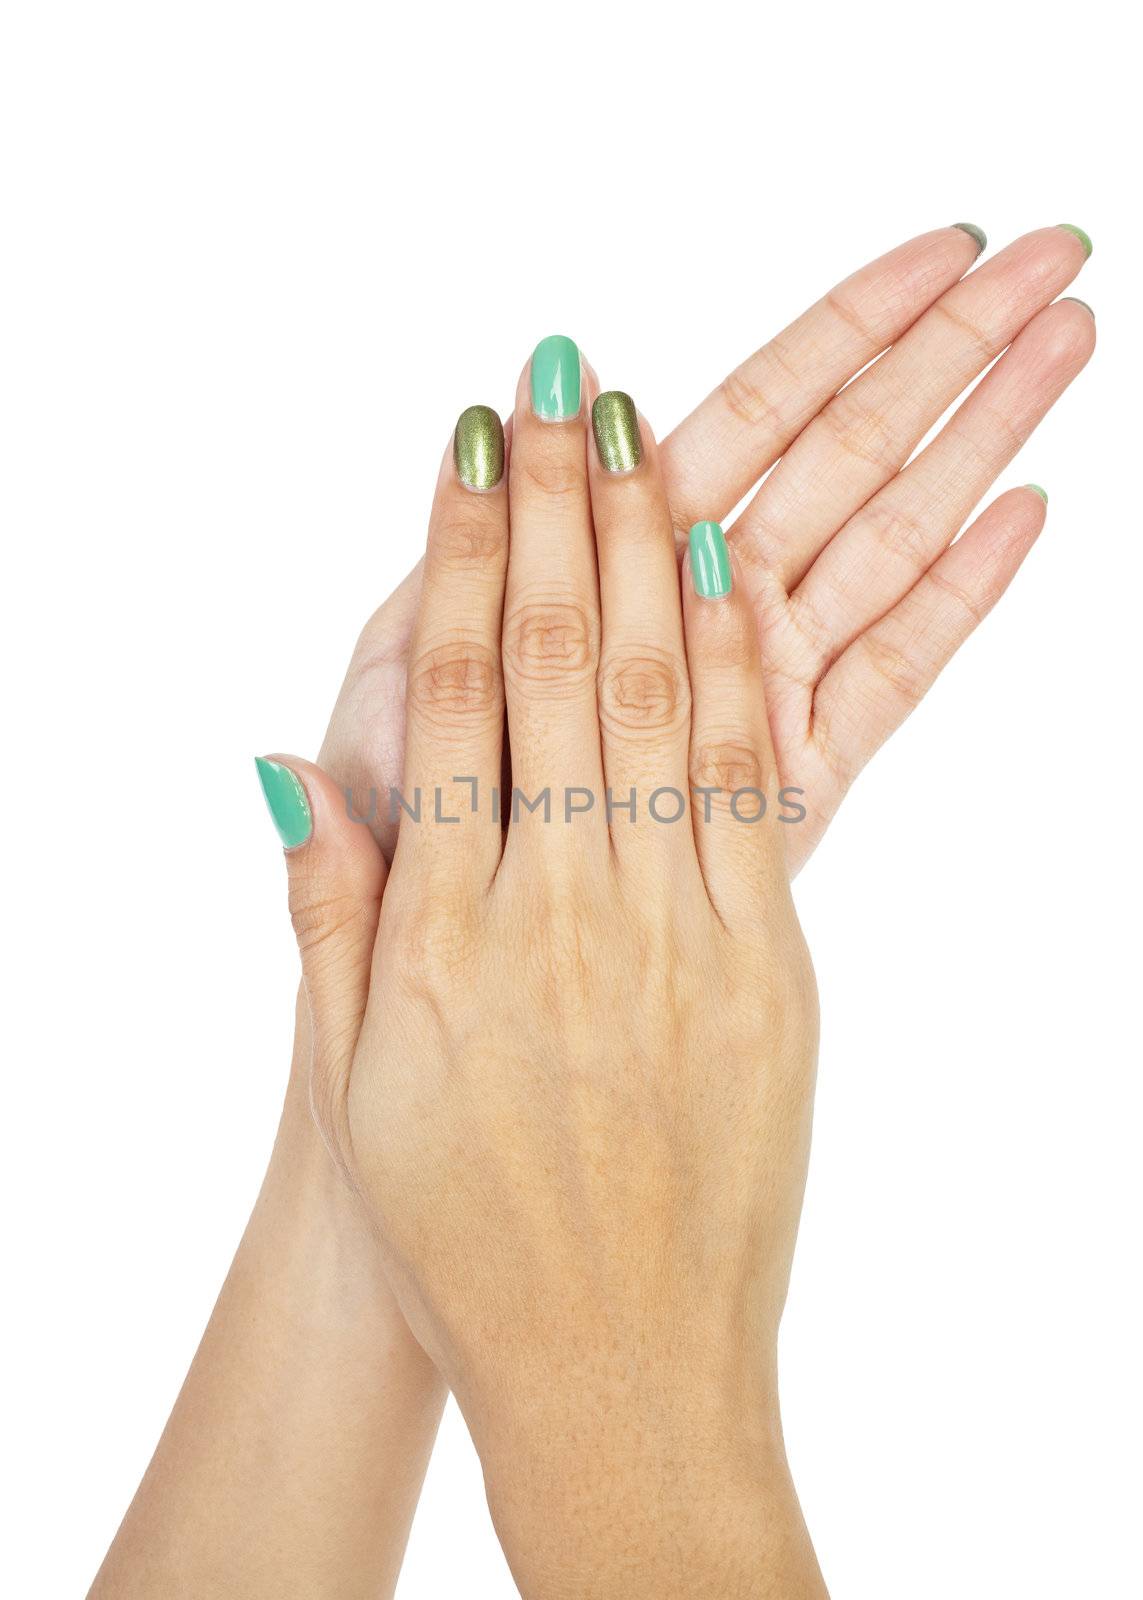 Women hands with nail manicure by FrameAngel